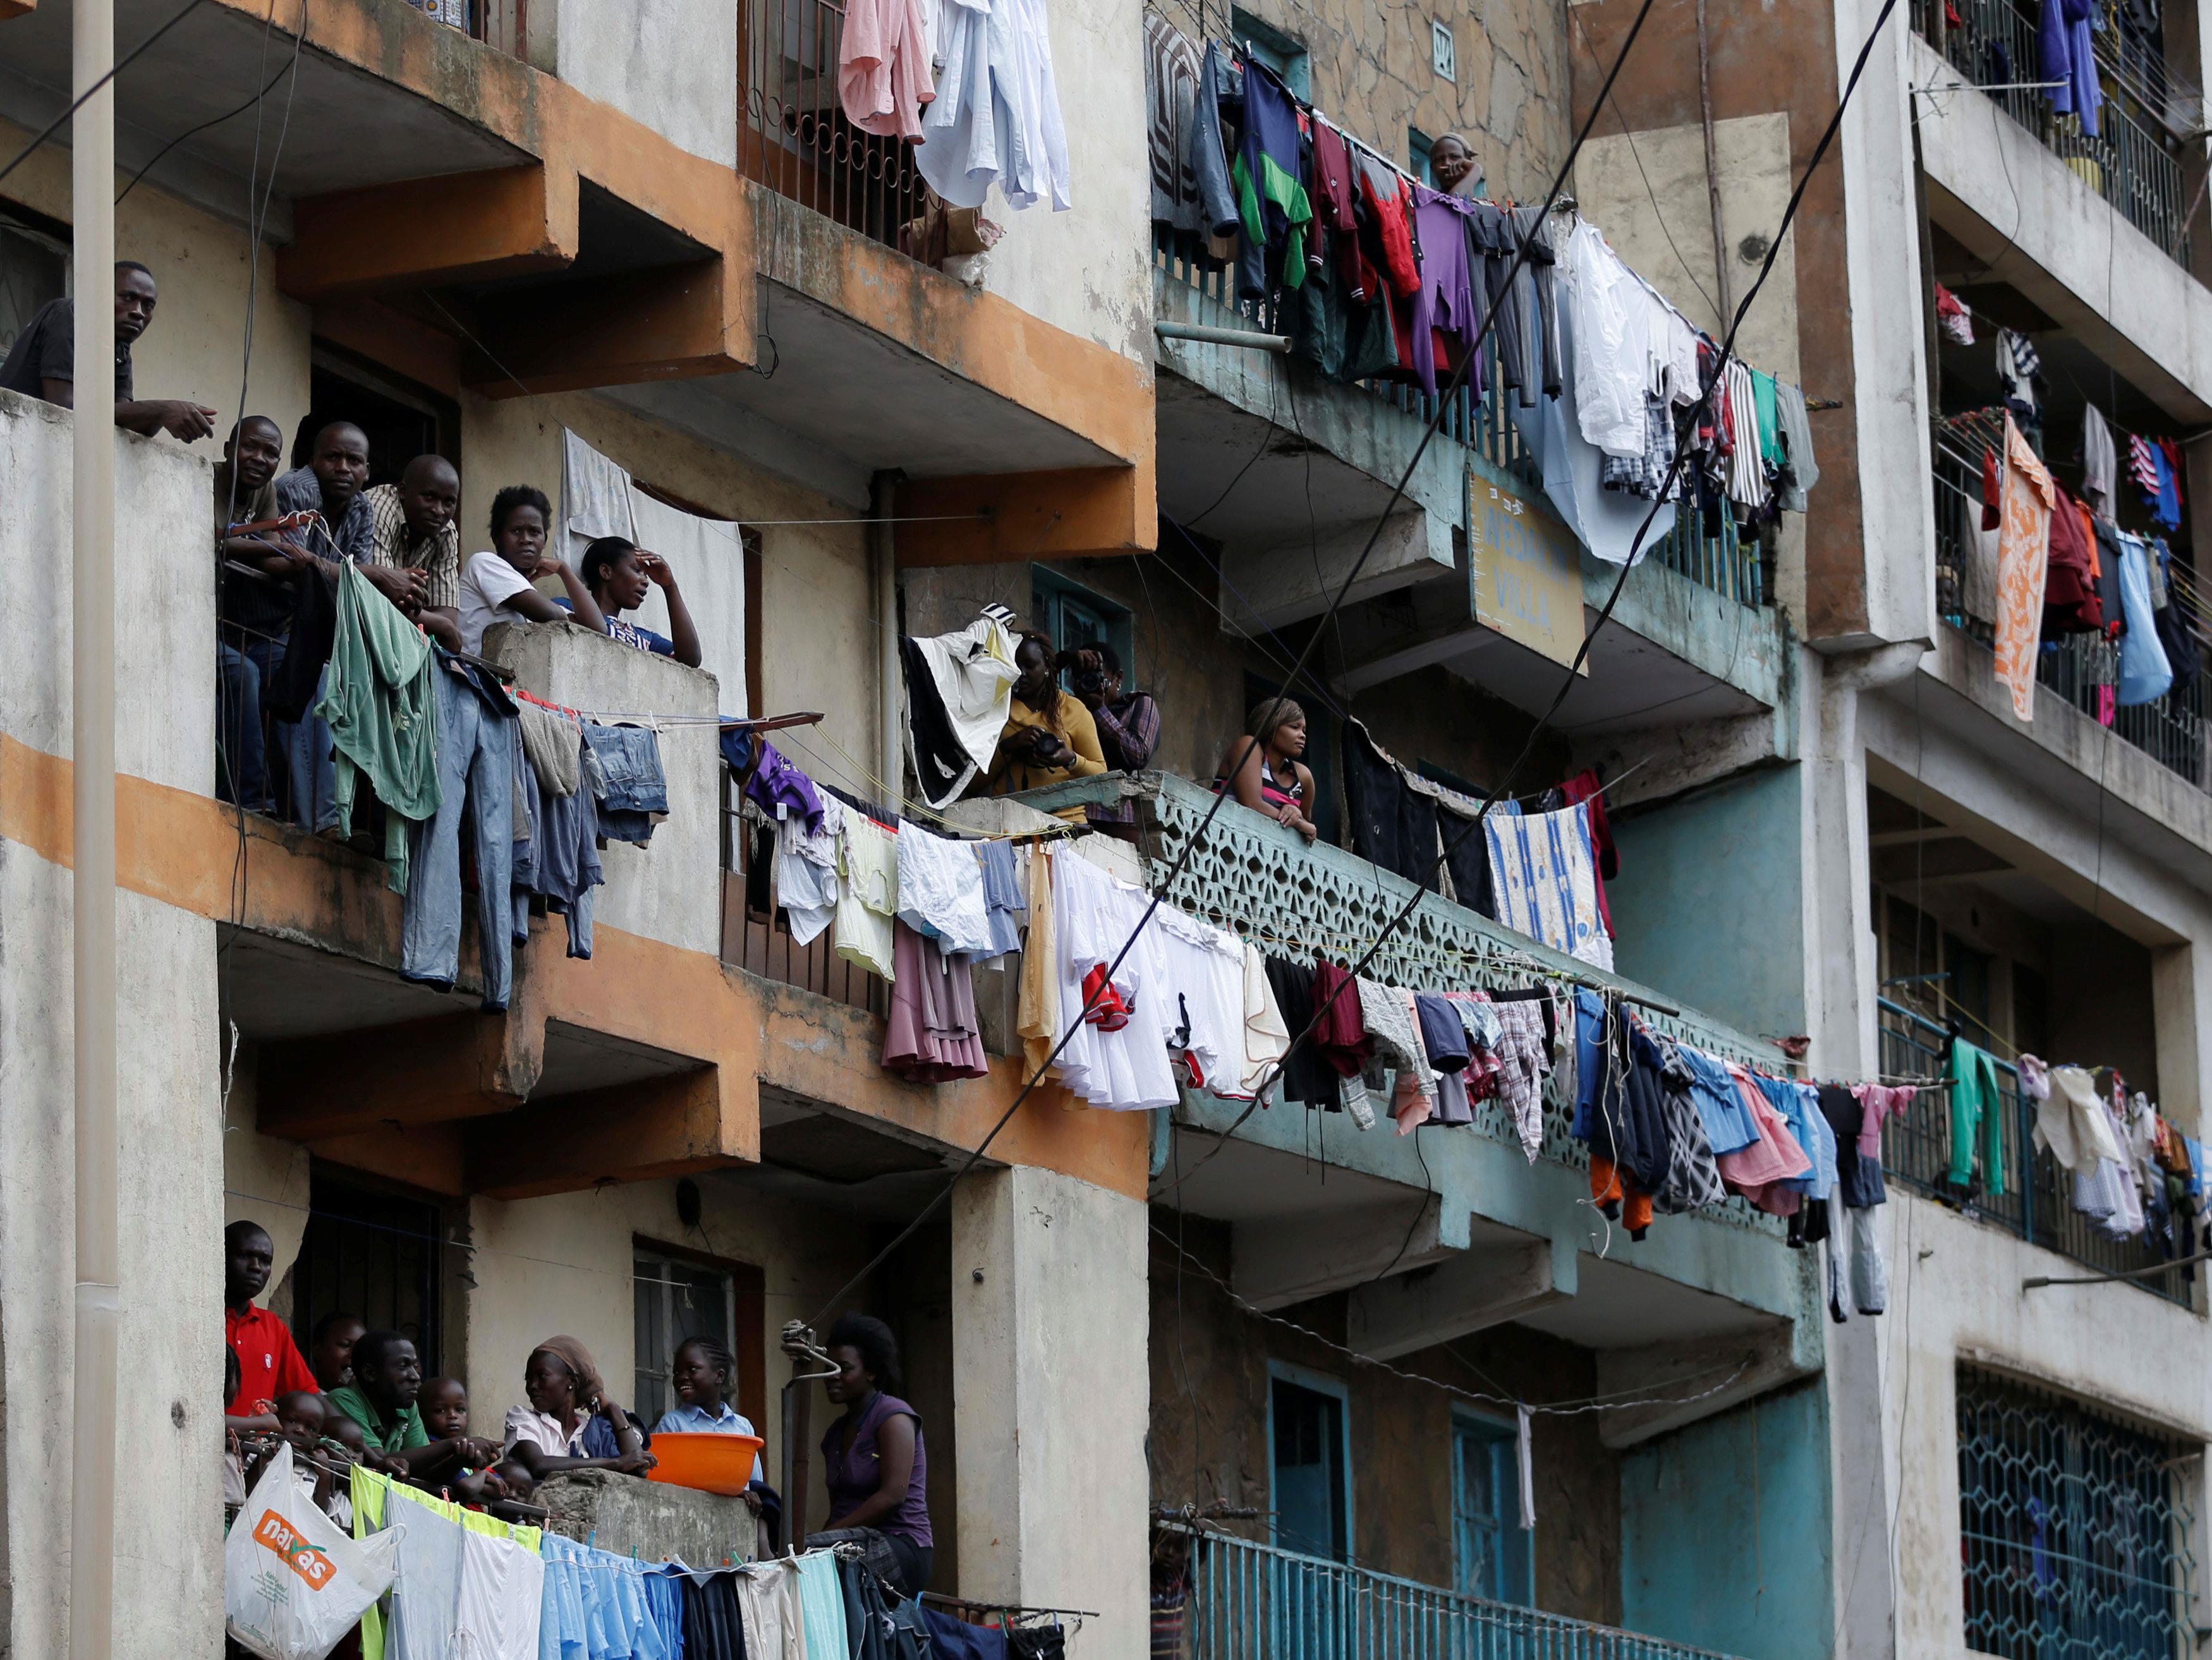 The Wider Image: Tearing down condemned homes in Nairobi